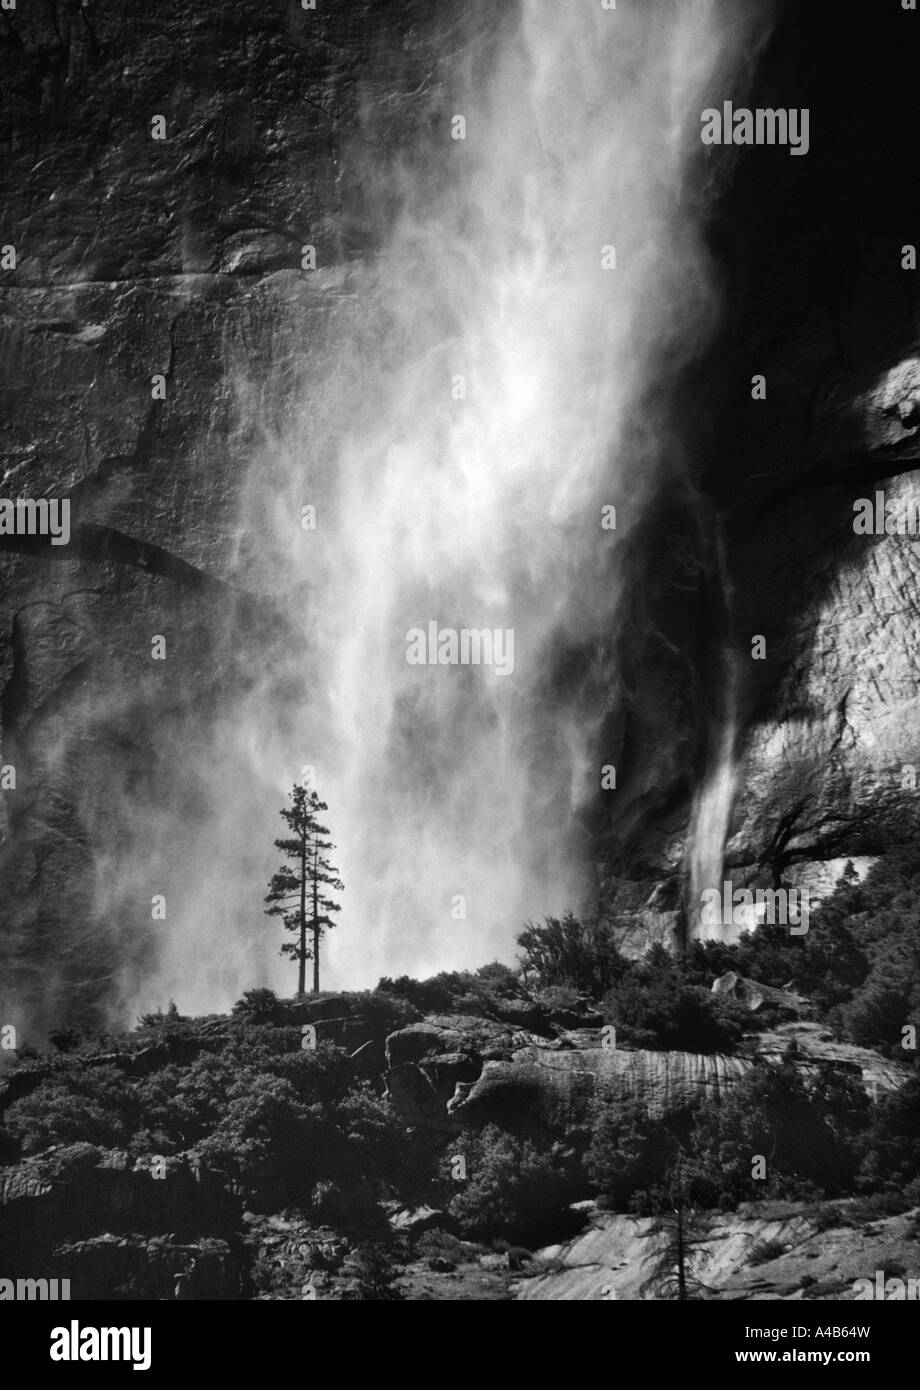 Monochrome image of Upper Yosemite Falls in full flow in summer with pine trees silhouetted against the falling water Stock Photo